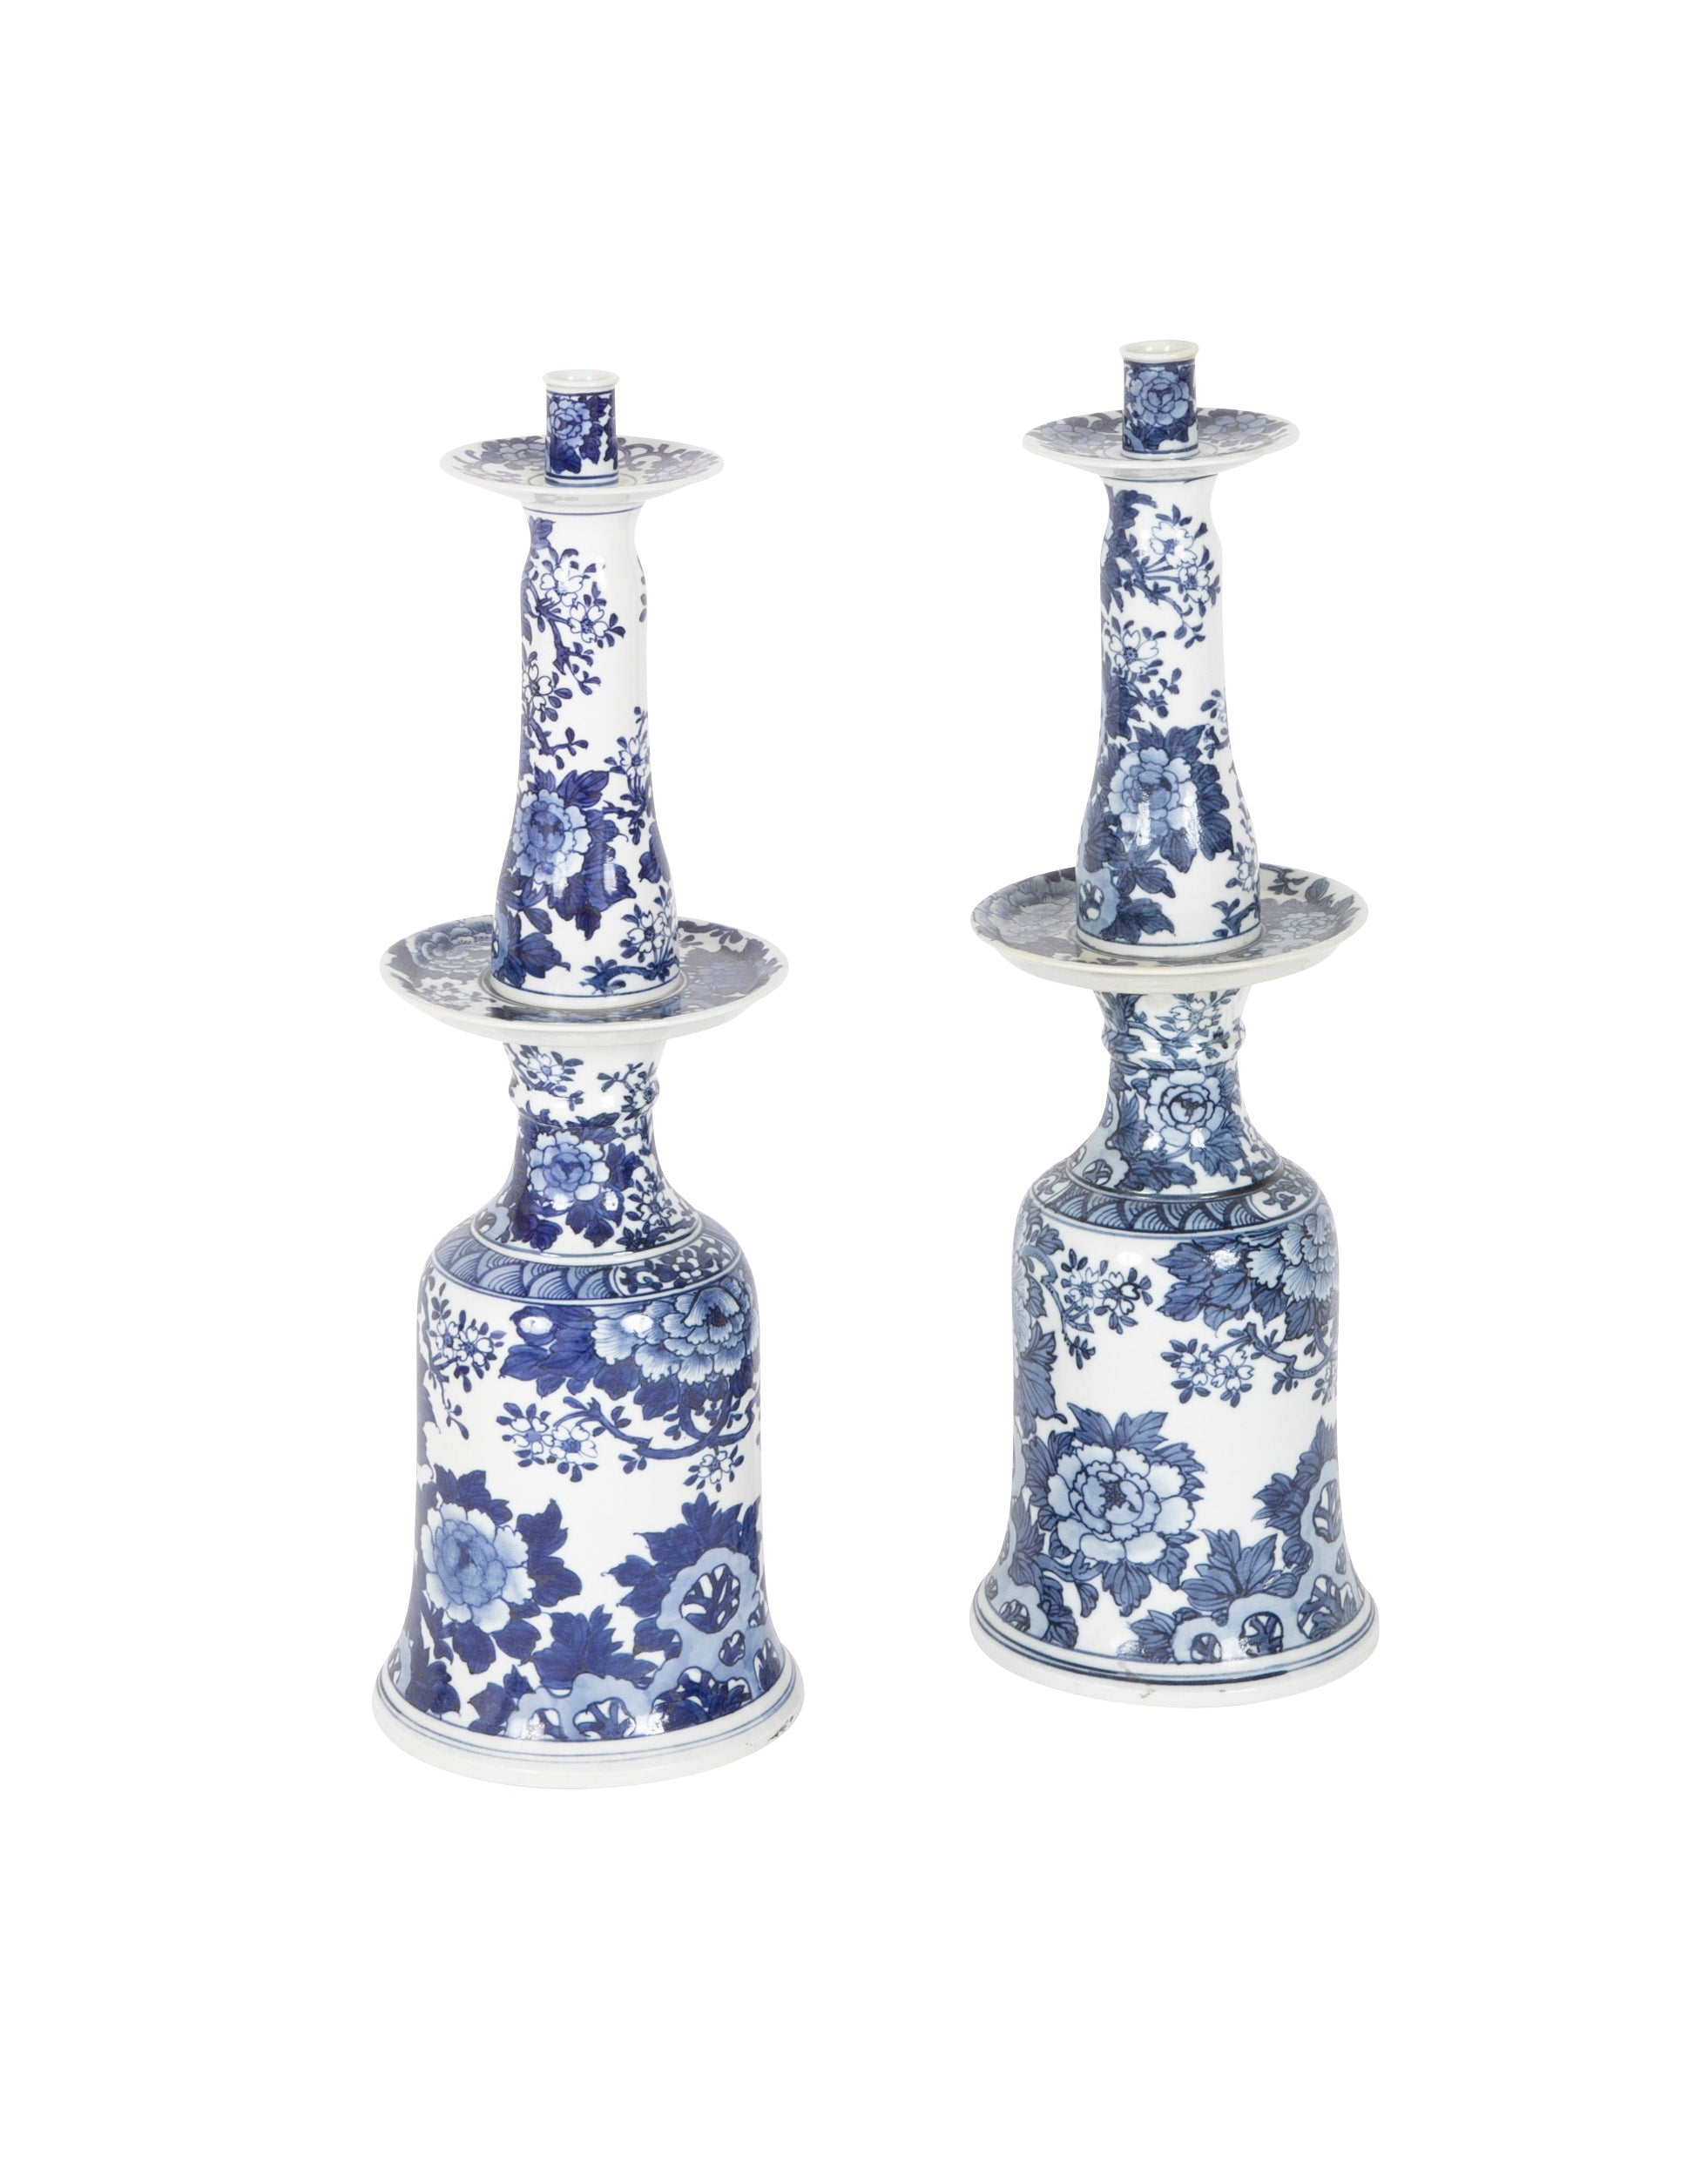 A Pair of 19th Century Signed Blue & White Chinese Candlesticks